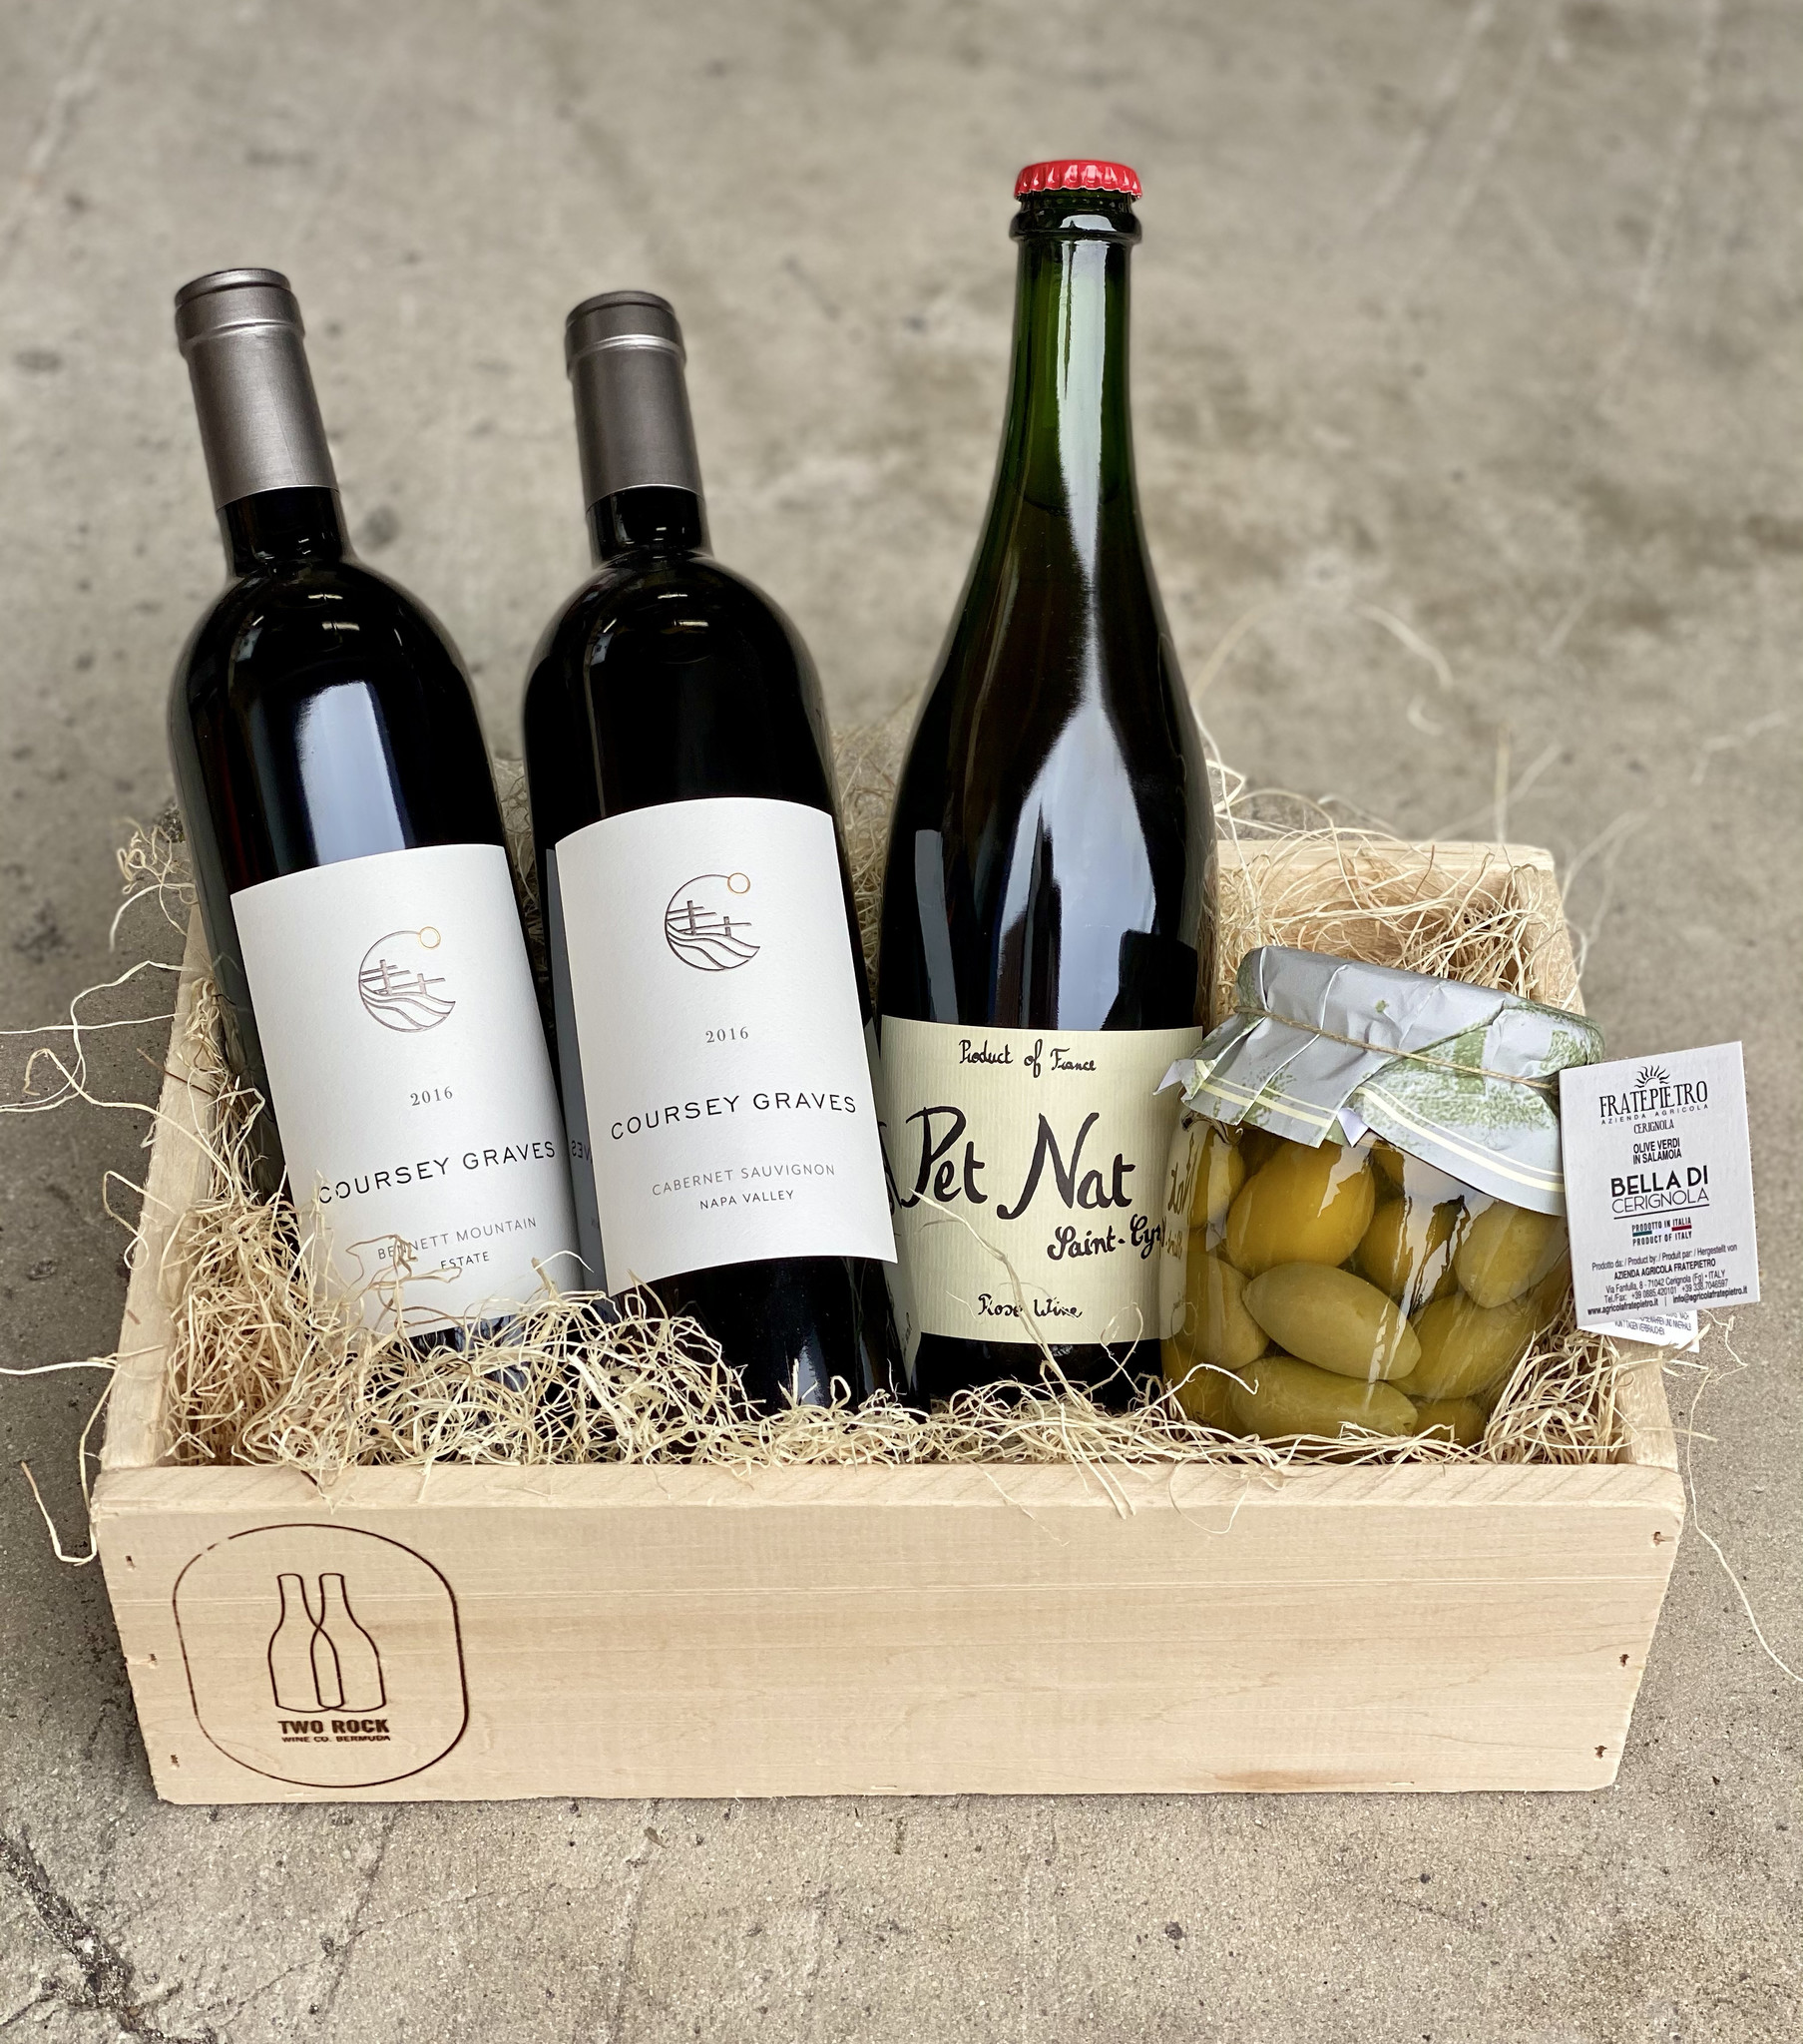 Our Blog - April 2020 Wine Club has shipped! - Two Rock Wine Company Ltd.